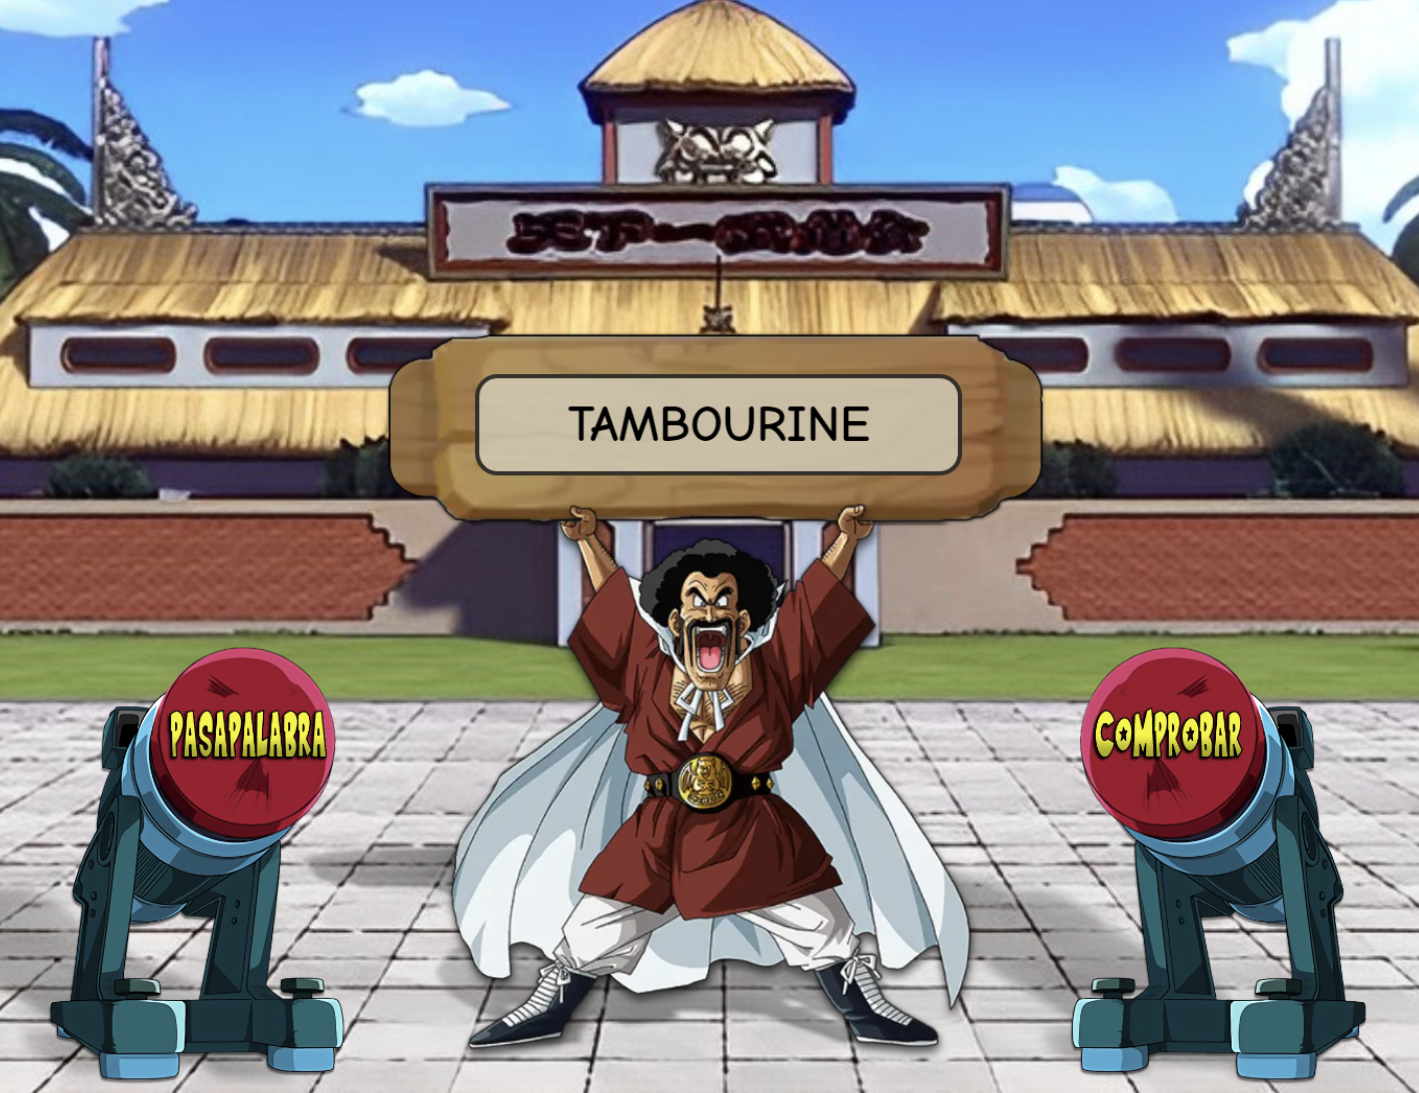 Panel for answering questions with Mr. Satan holding a board and 2 punch machines to answer or skip words.